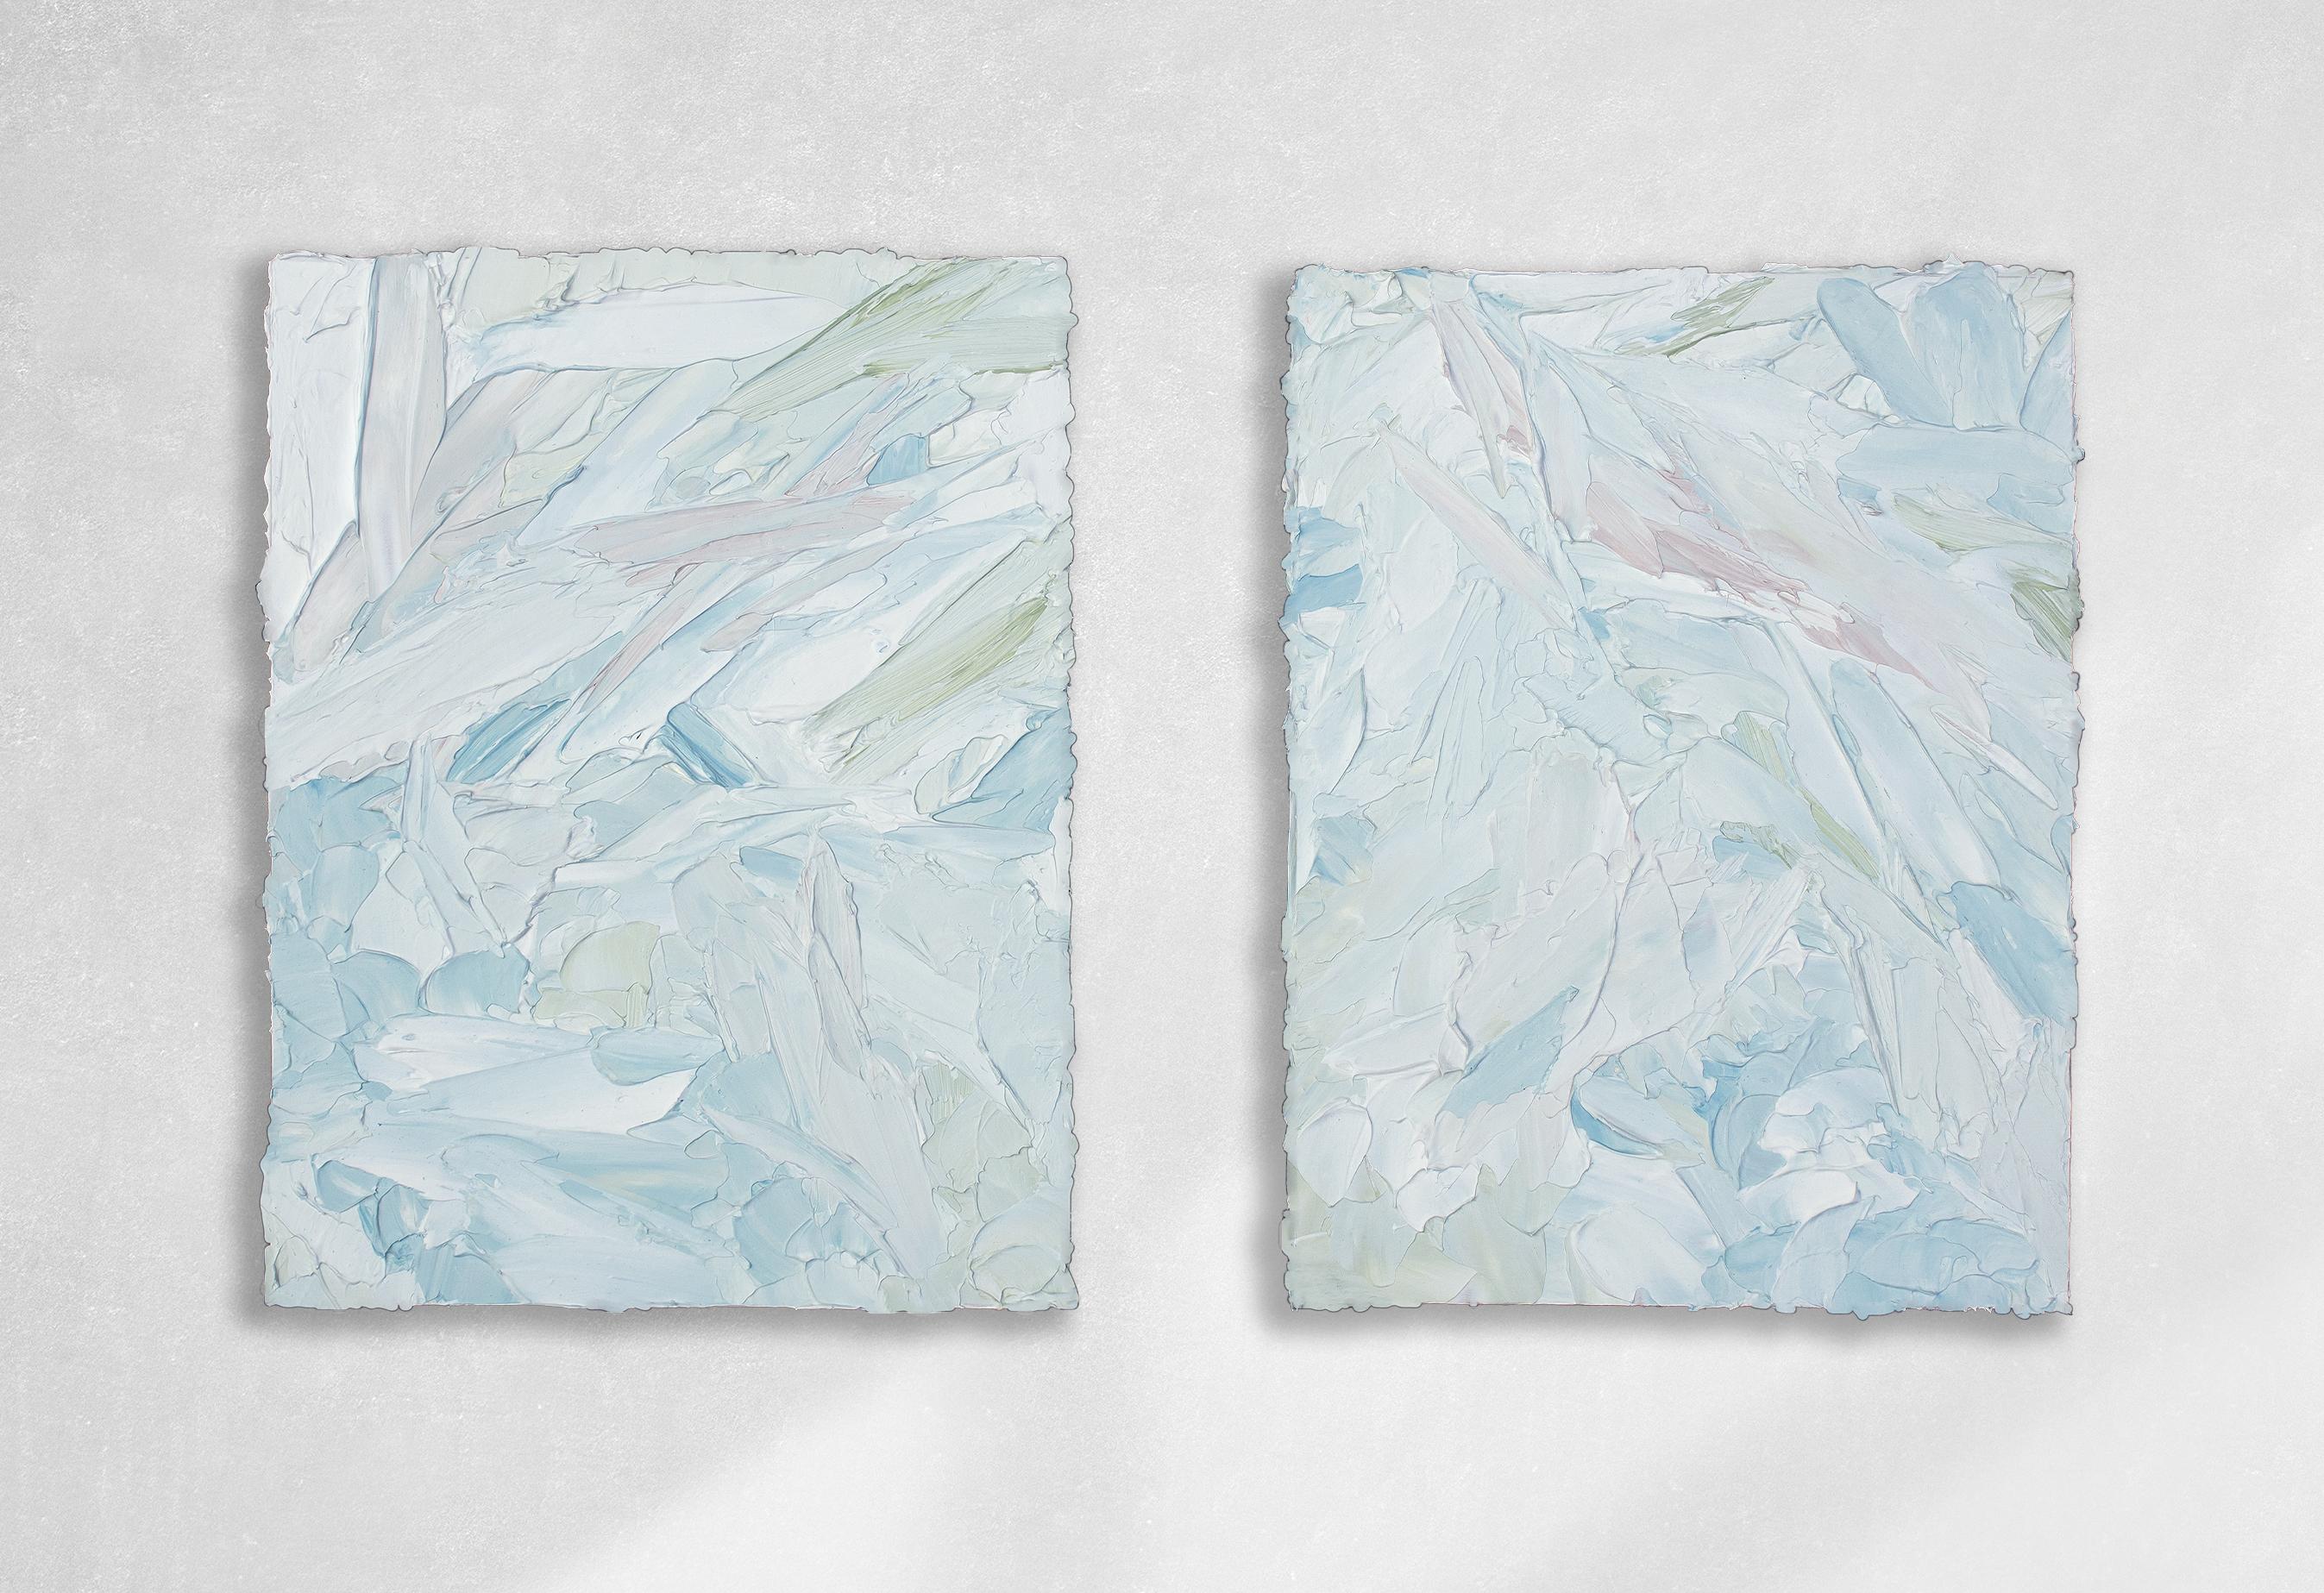 Abstract Painting Teodora Guererra - Peinture diptyque abstraite « Walk in the Park I and II »